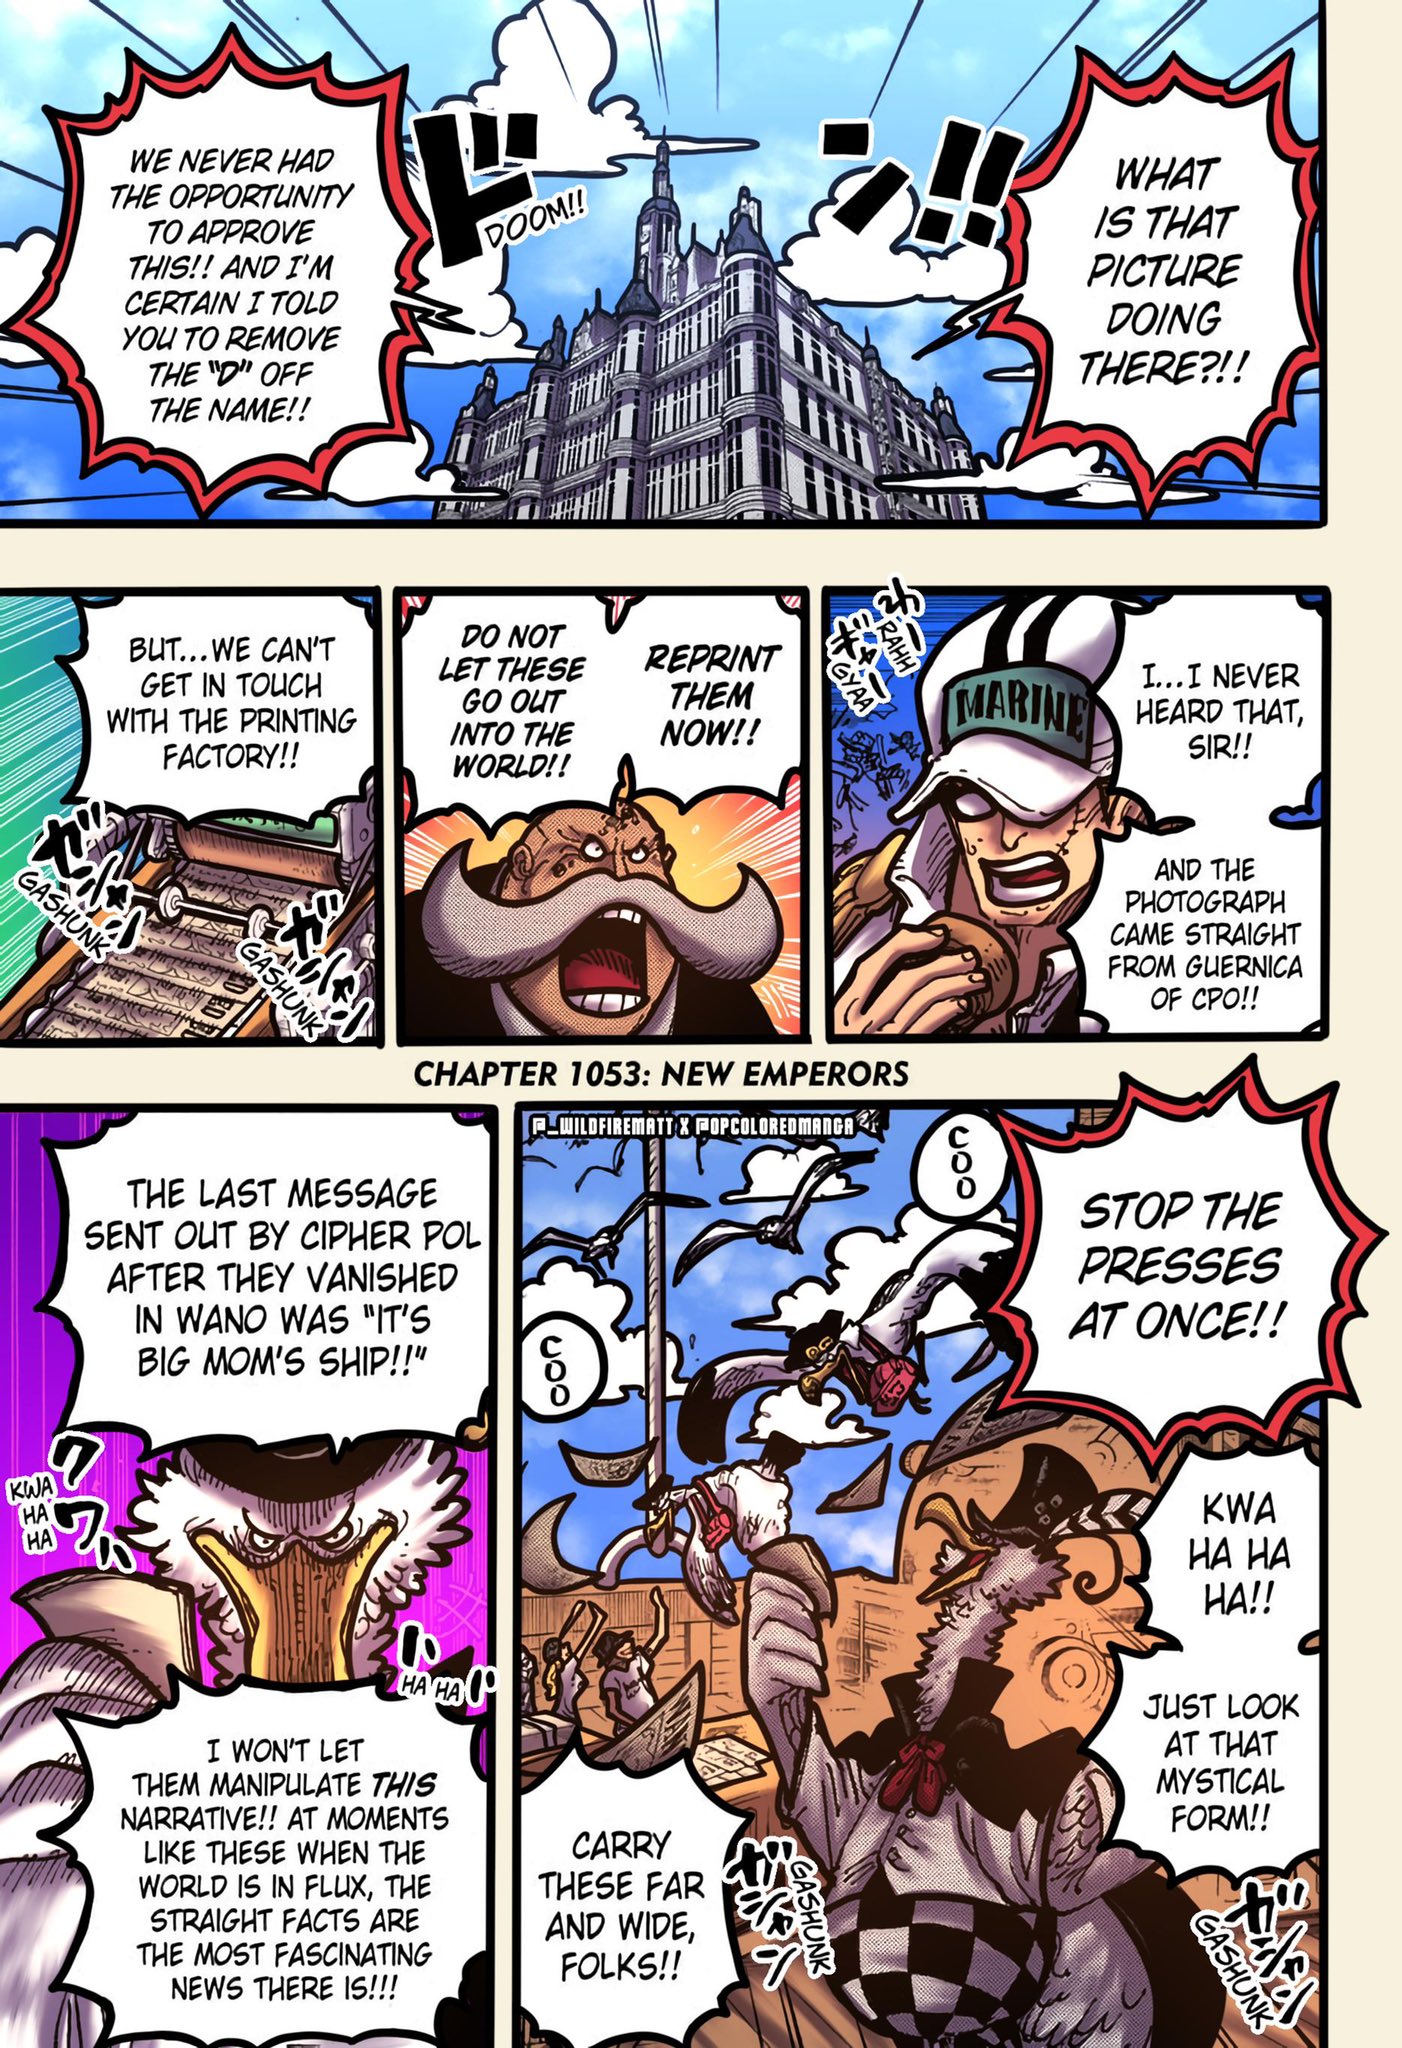 One piece chapter 1057 colored by me (and full colored on